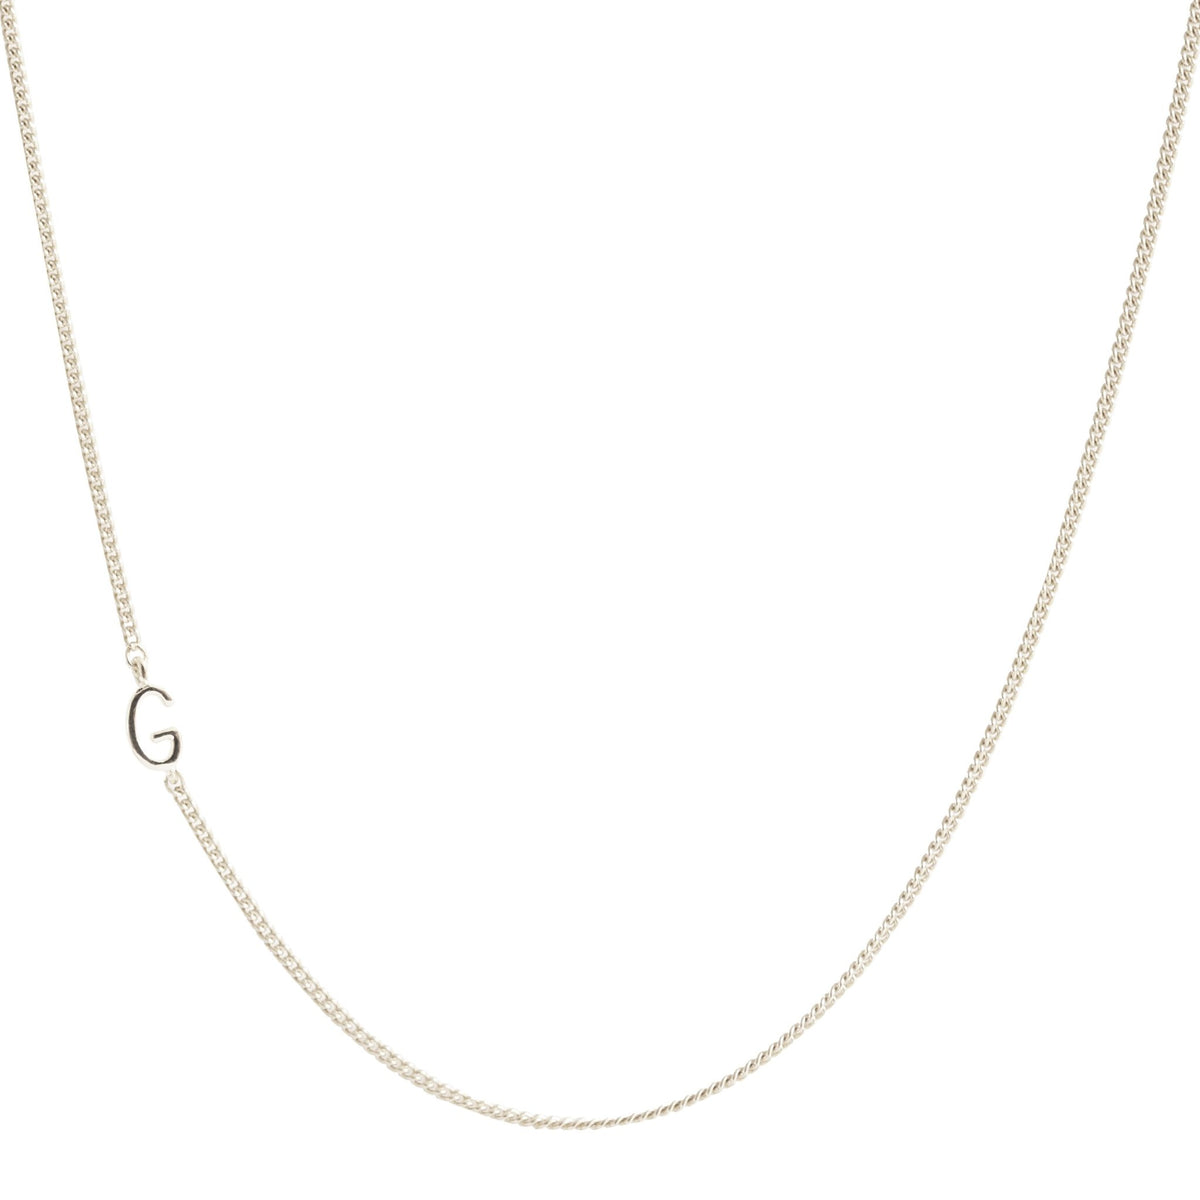 NOTABLE OFFSET INITIAL NECKLACE - G - GOLD, ROSE GOLD, OR SILVER - SO PRETTY CARA COTTER